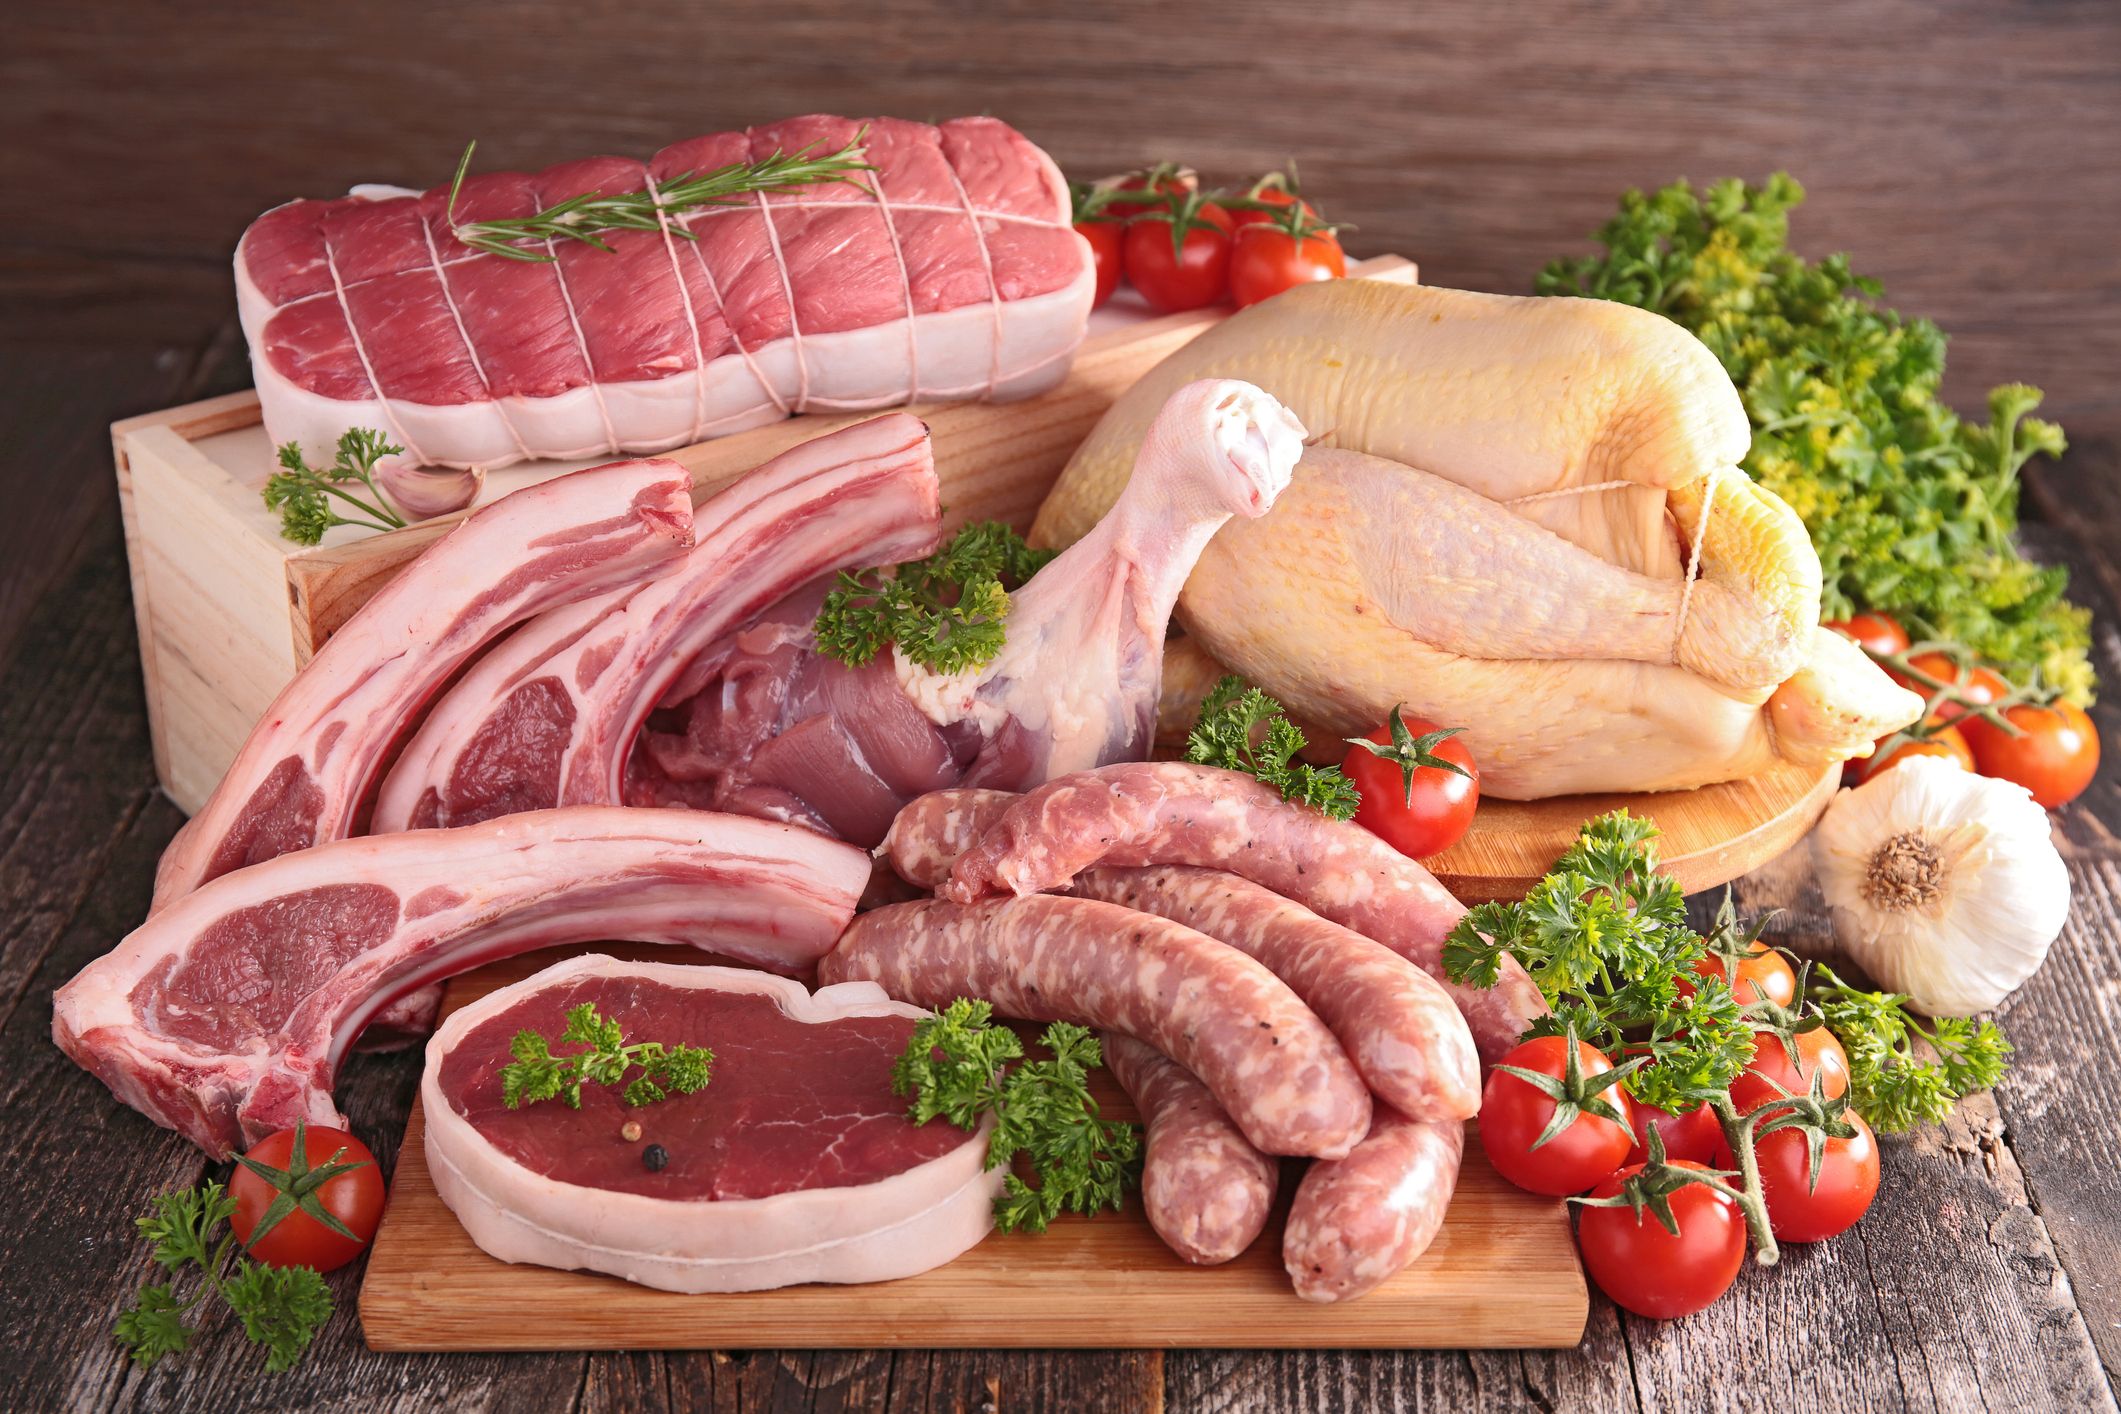 Things To Look For When Choosing A Butcher